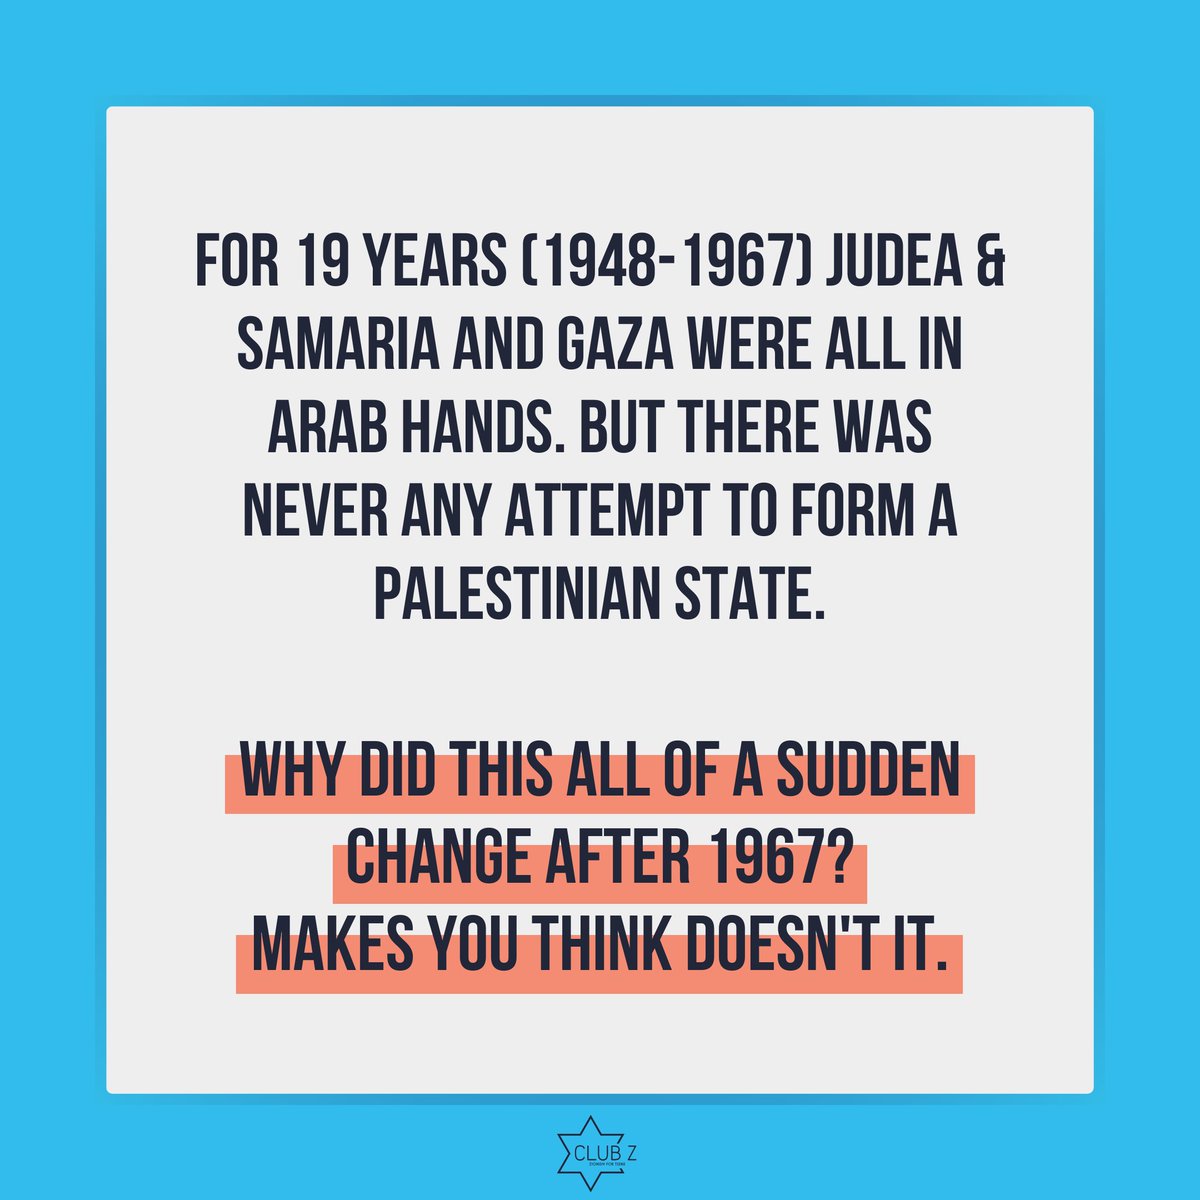 Curious isn't it? Almost like the 'Palestinian cause' can only manifest when Israel and Jews are involved.